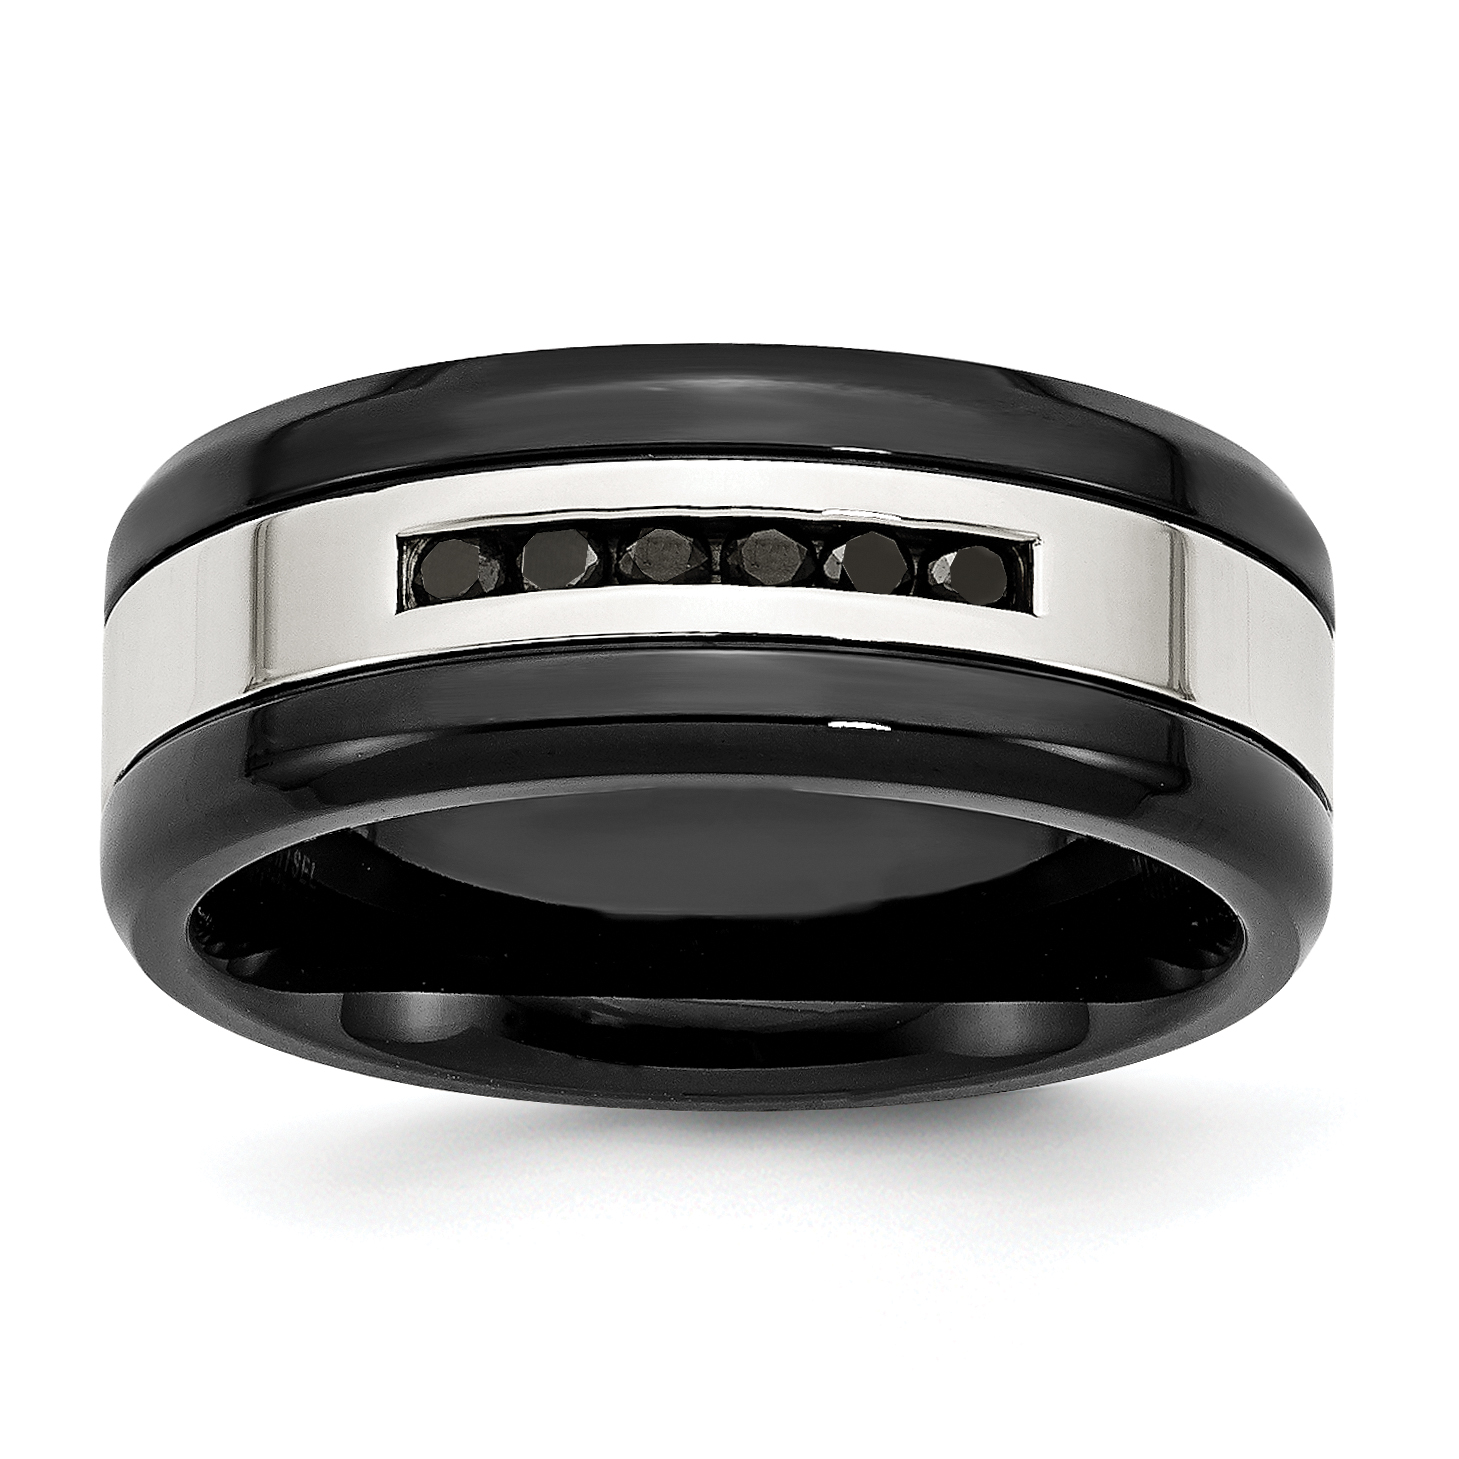 Personalized Inside Engraving Ceramic Wedding Band Ring 8mm Seven CZ Stone Stainless Steel Black Ring